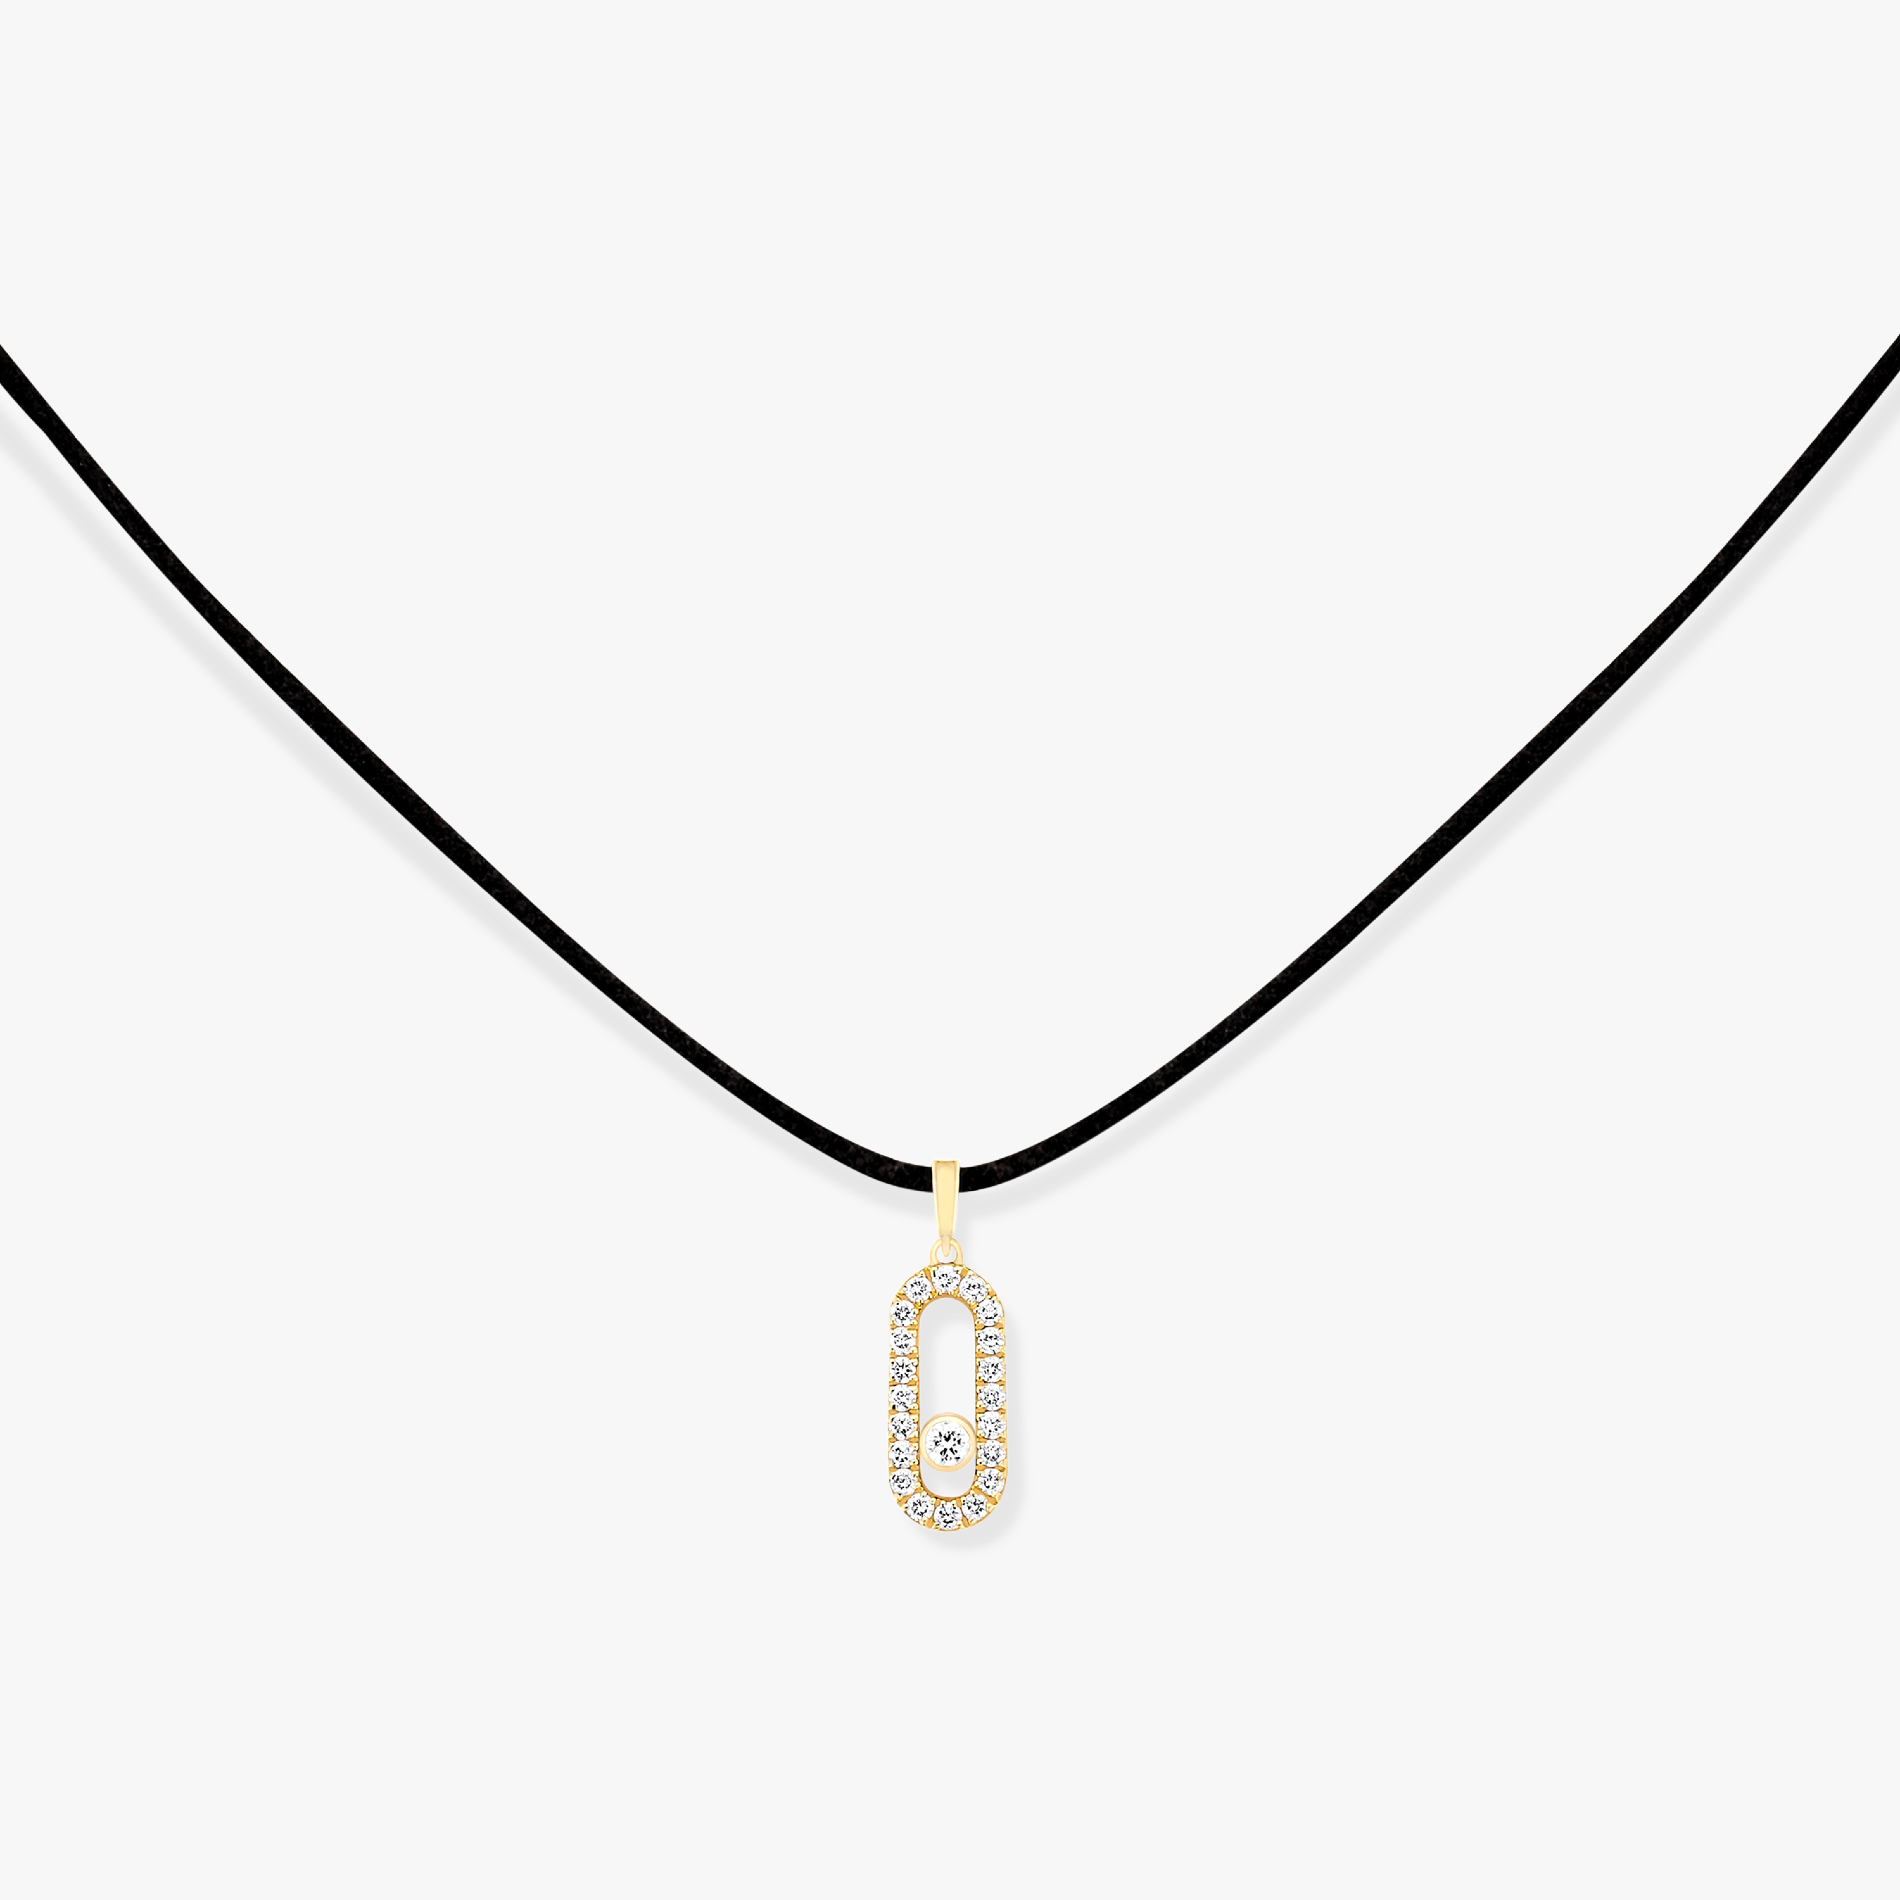 Collier Femme Or Jaune Diamant Collier Messika CARE(S) Pavé 12073-YG